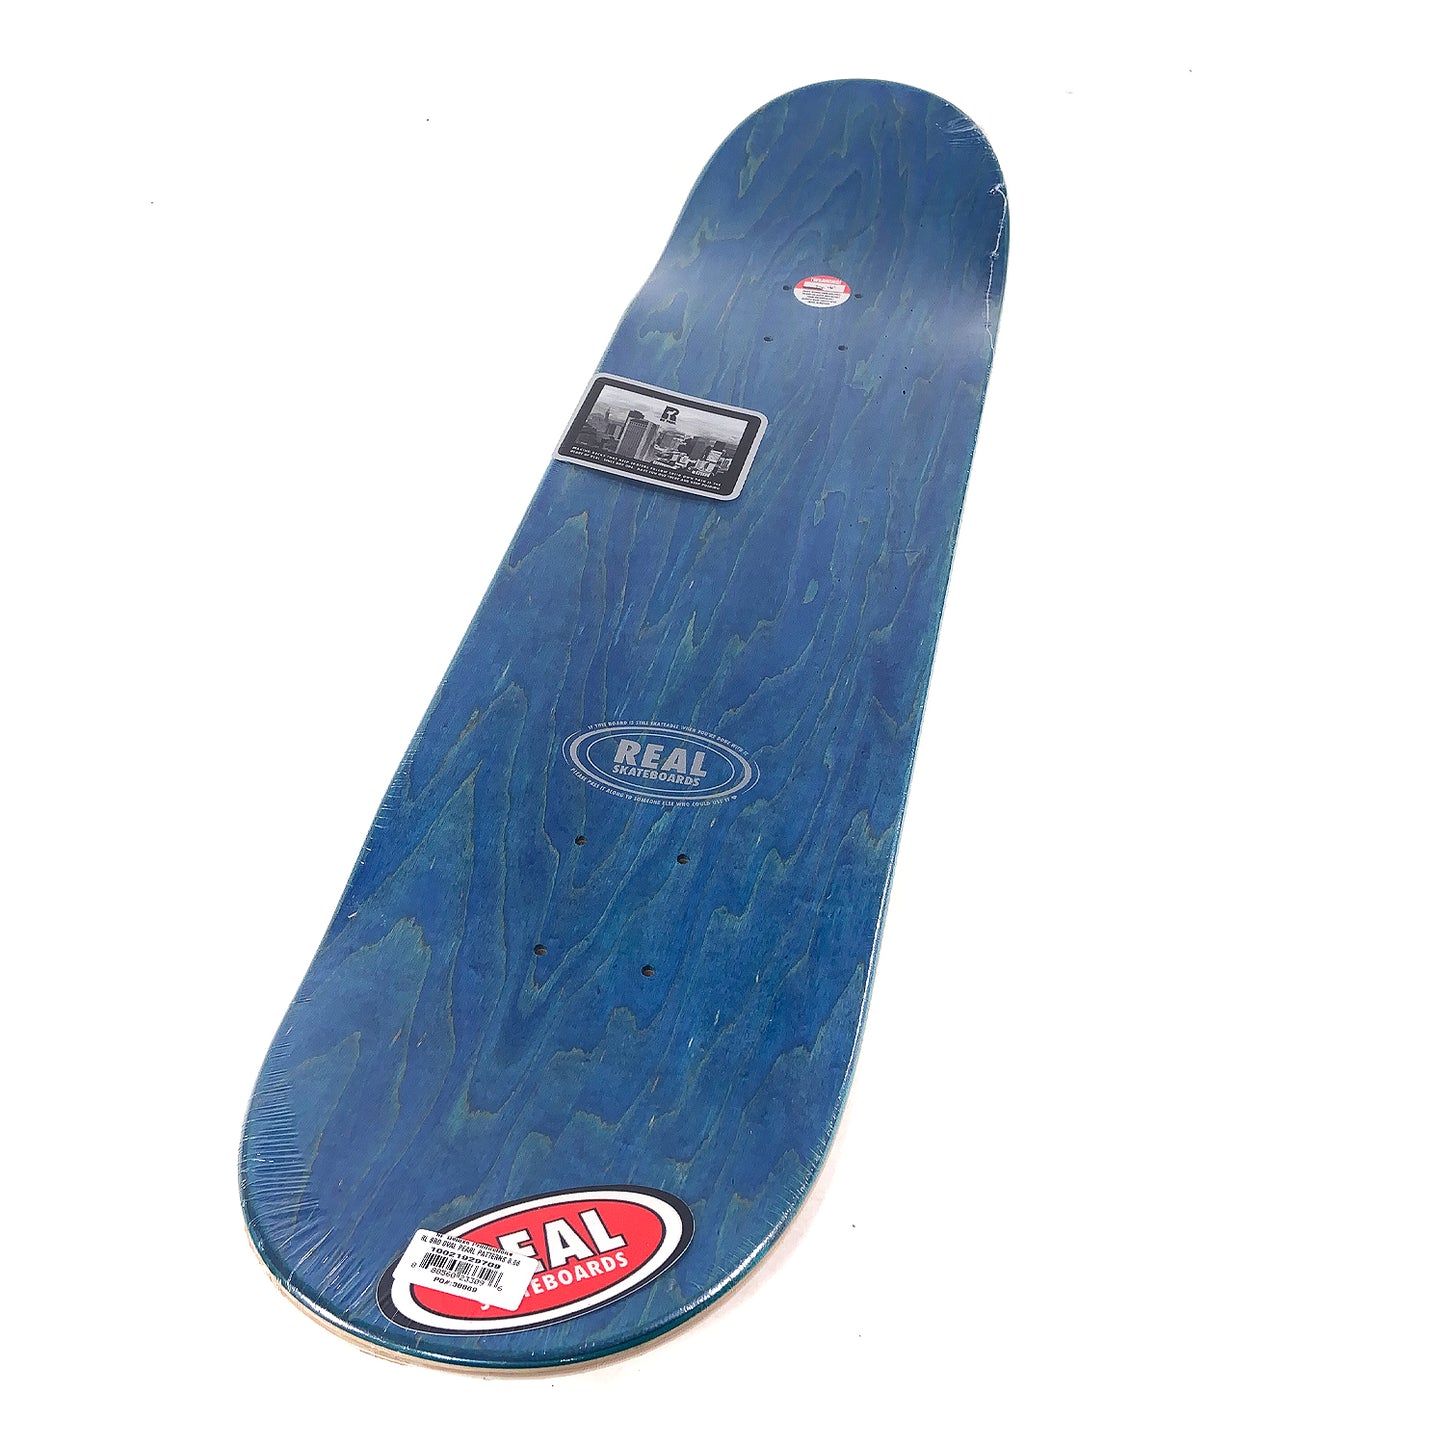 Real - 8.06" - Team Oval Pearl Patterns Deck - Blue Stain - Prime Delux Store